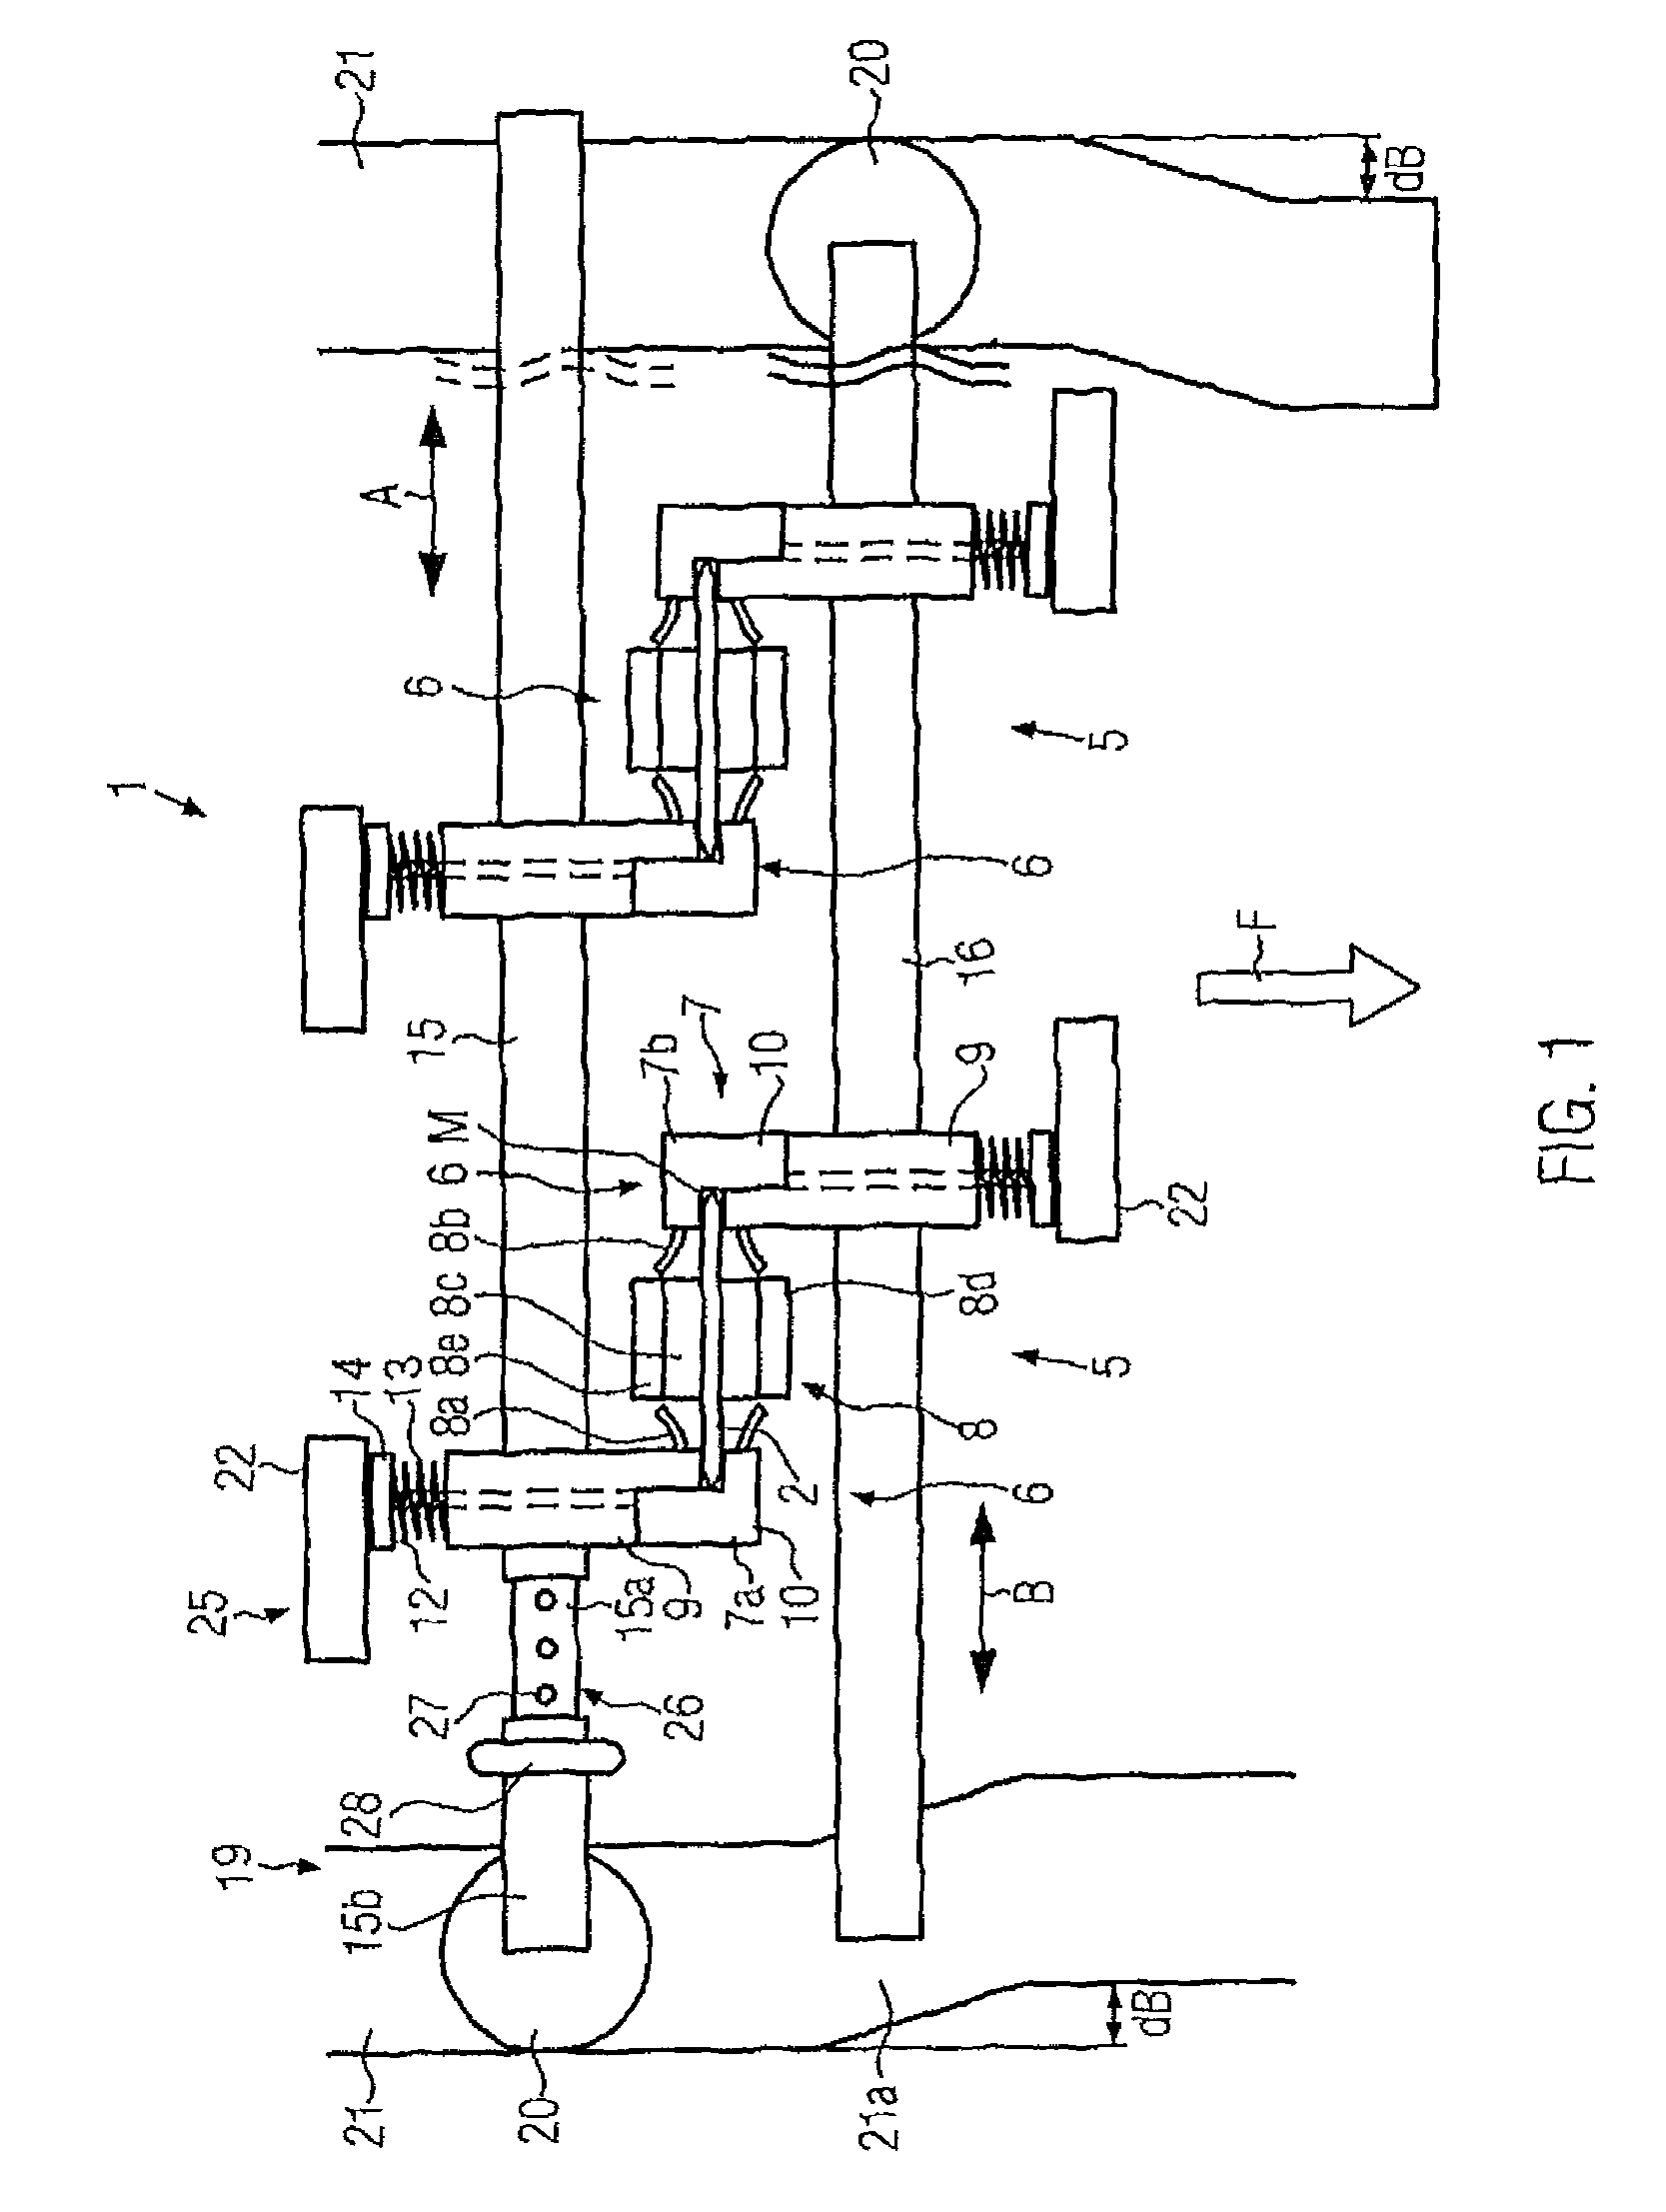 Transport system for handling multi-width flexible pouches